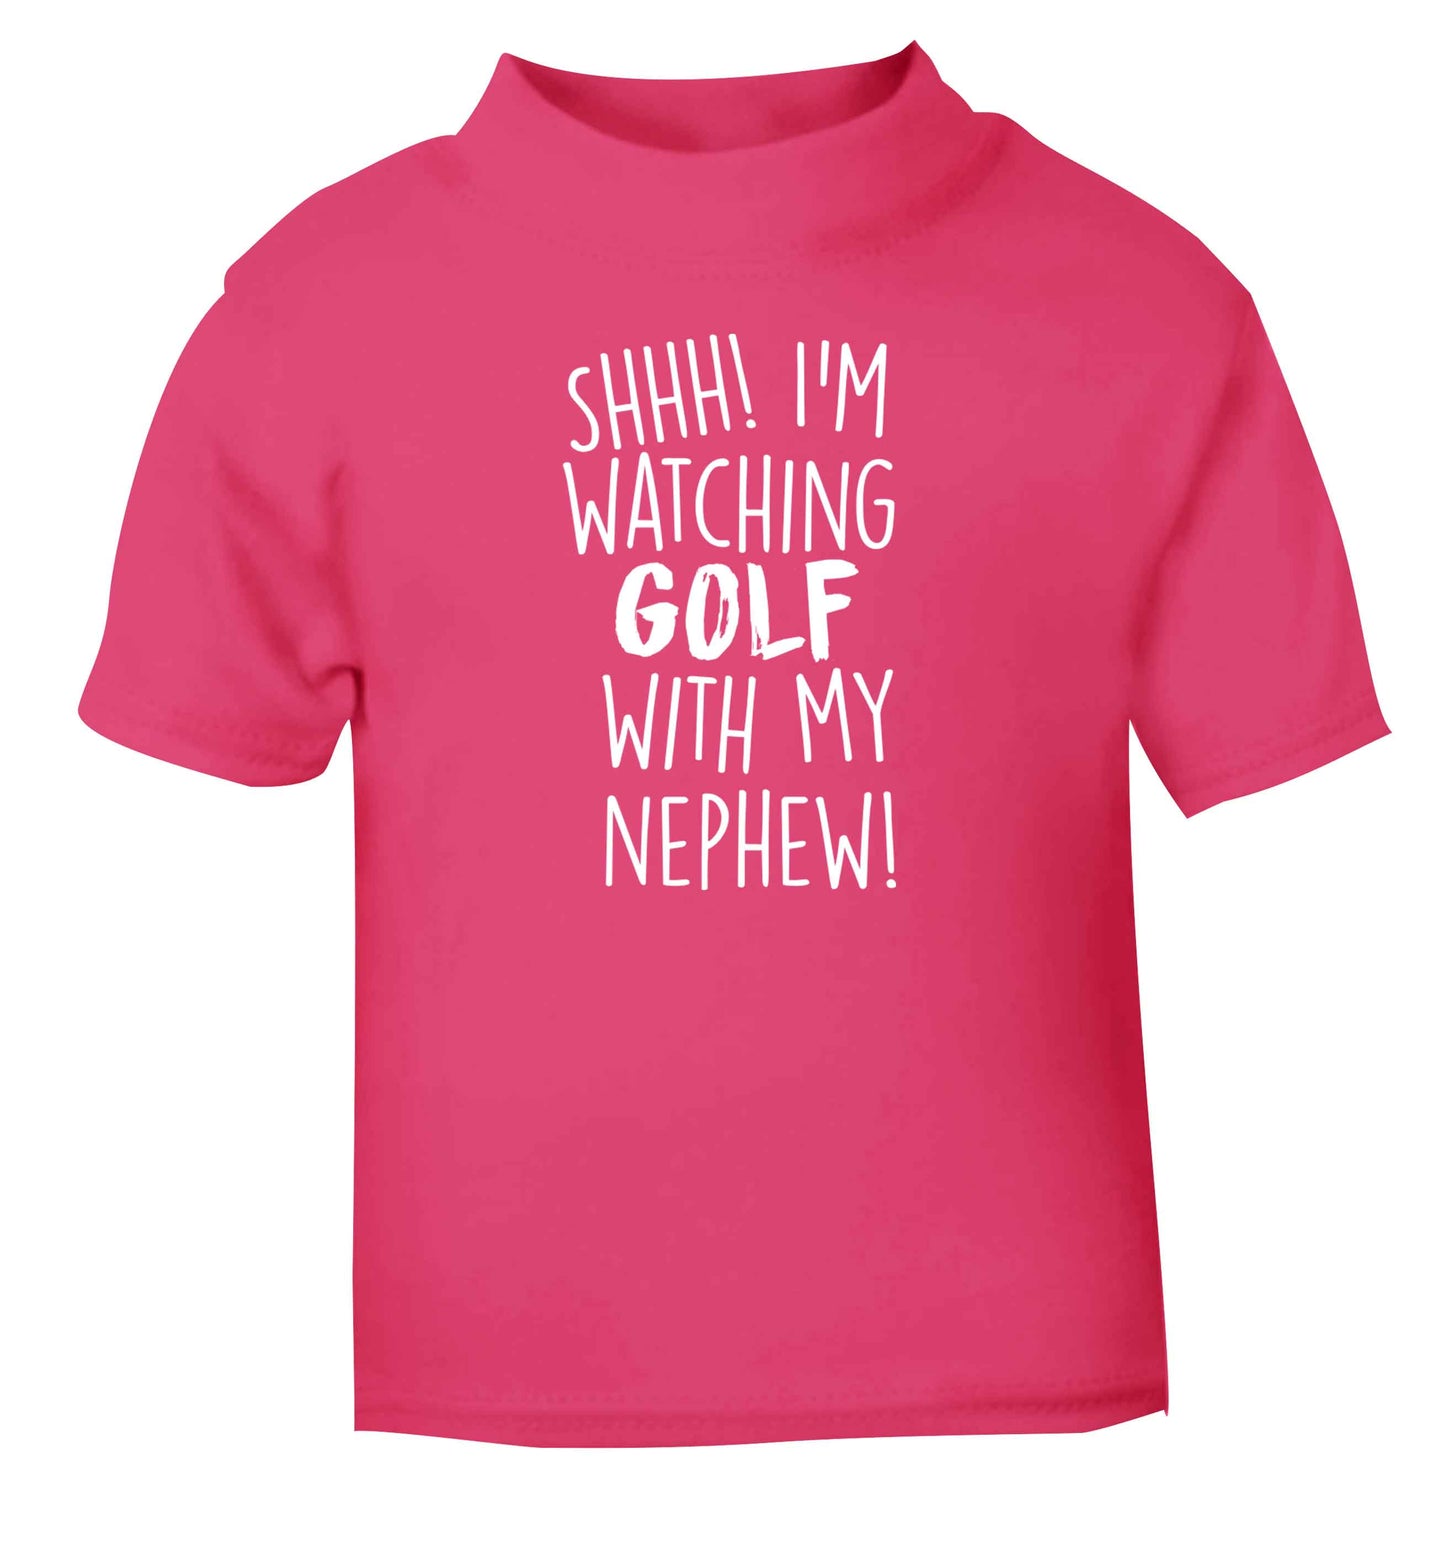 Shh I'm watching golf with my nephew pink Baby Toddler Tshirt 2 Years